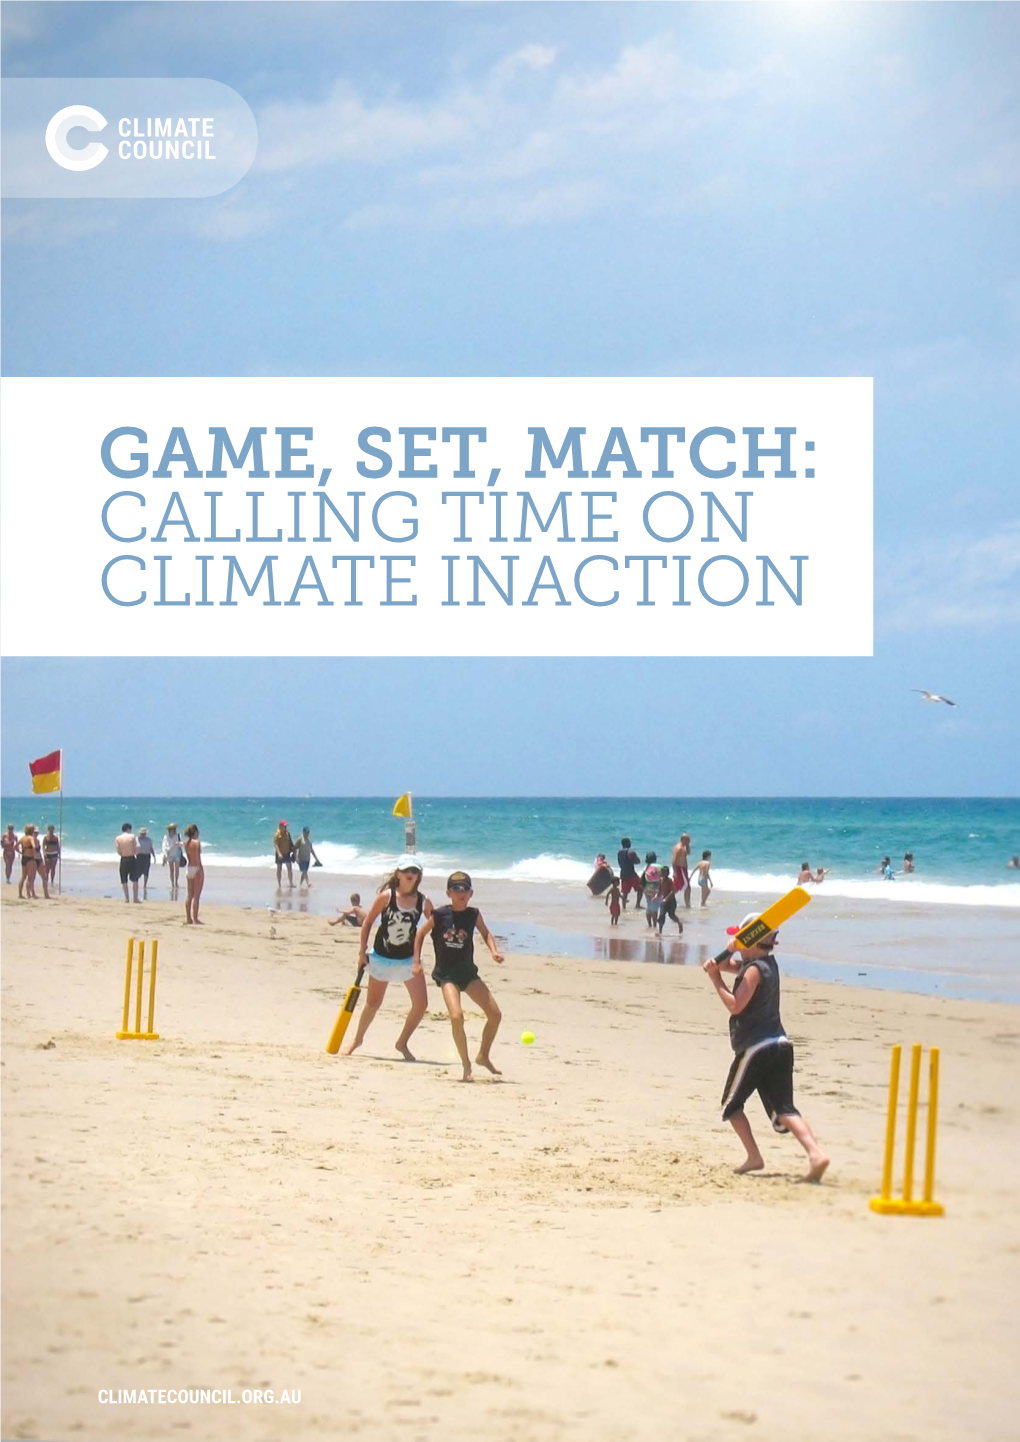 Game, Set, Match: Calling Time on Climate Inaction